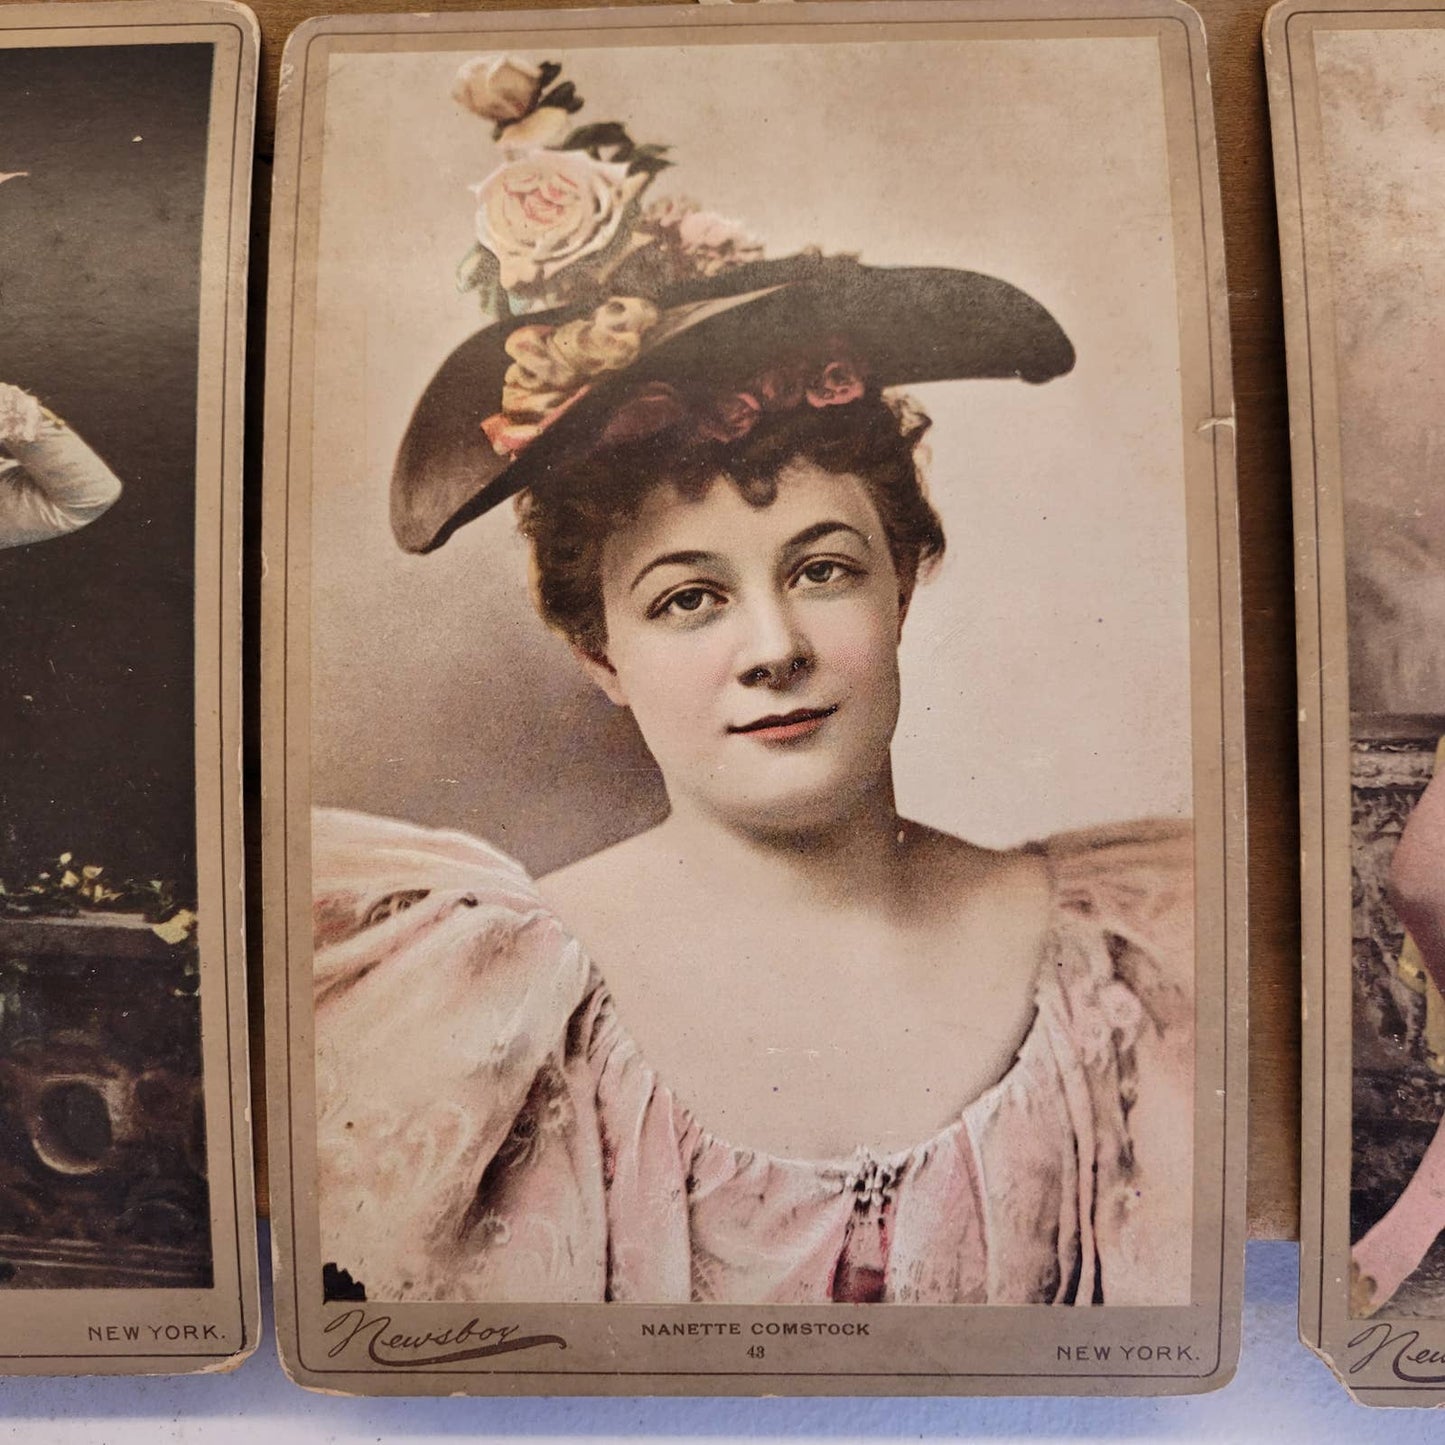 1890s NEWSBOY Tobacco ACTRESS Large 6x9 COLOR CABINET CARD Premiums